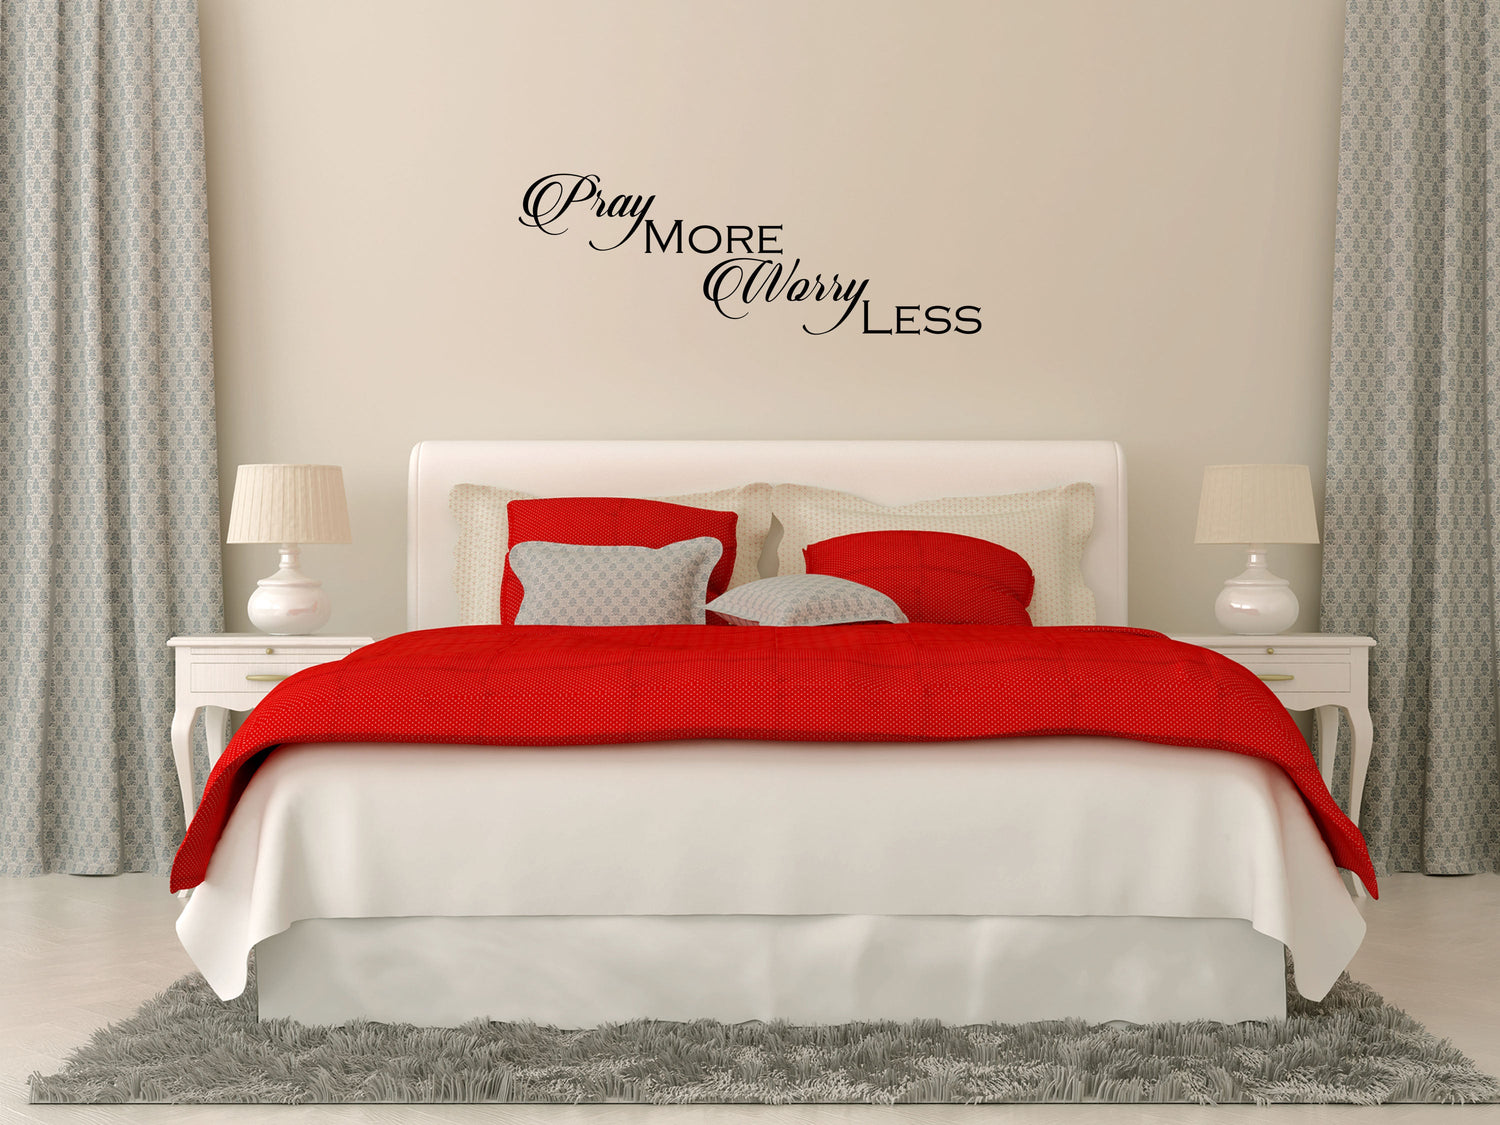 Pray More Worry Less Vinyl Wall Decal Quote Vinyl Wall Decal Inspirational Wall Signs 